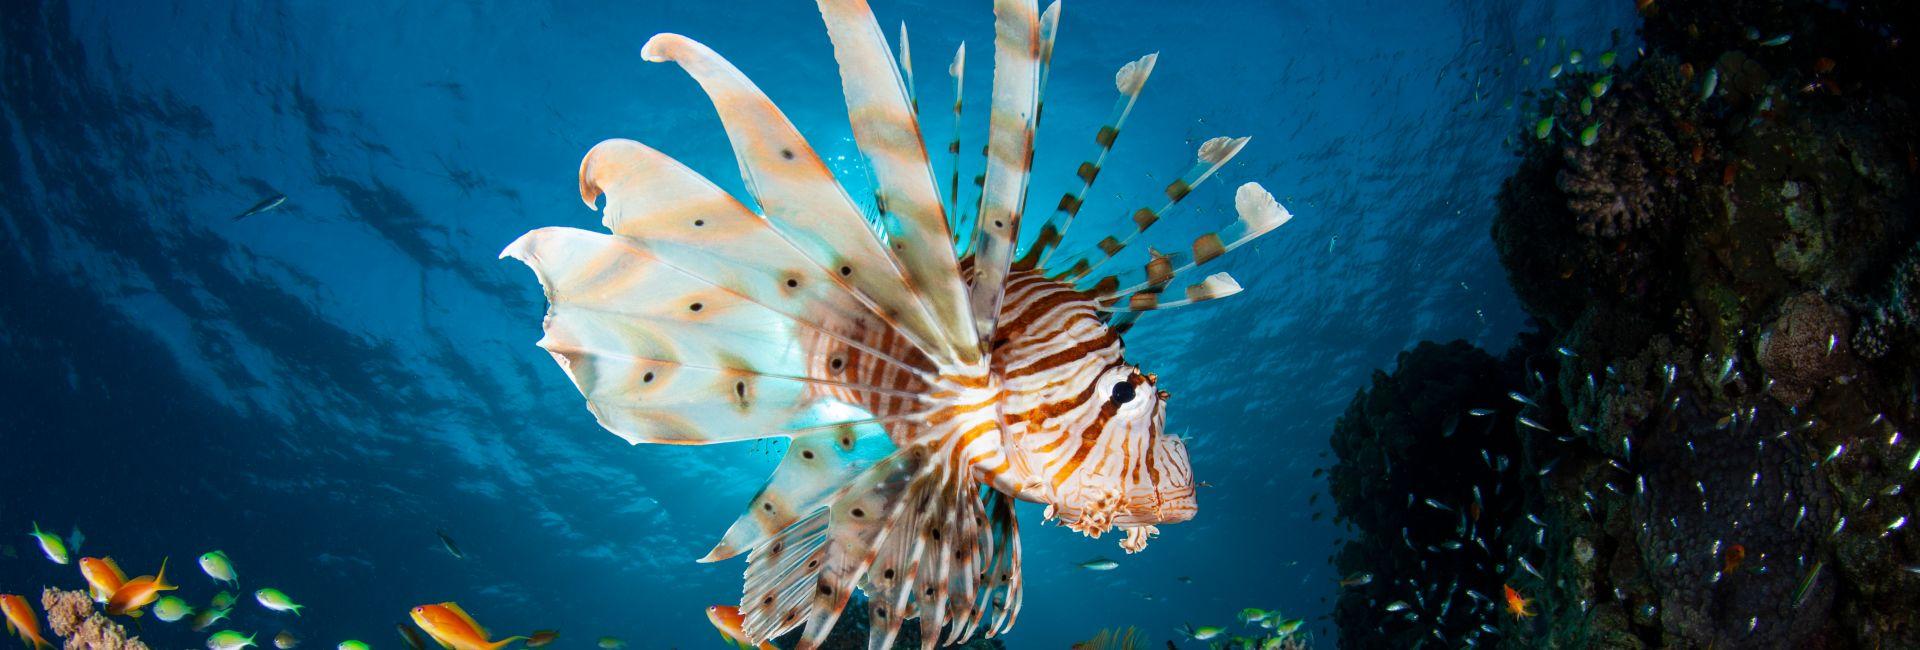 An Invasive Species: The Lionfish